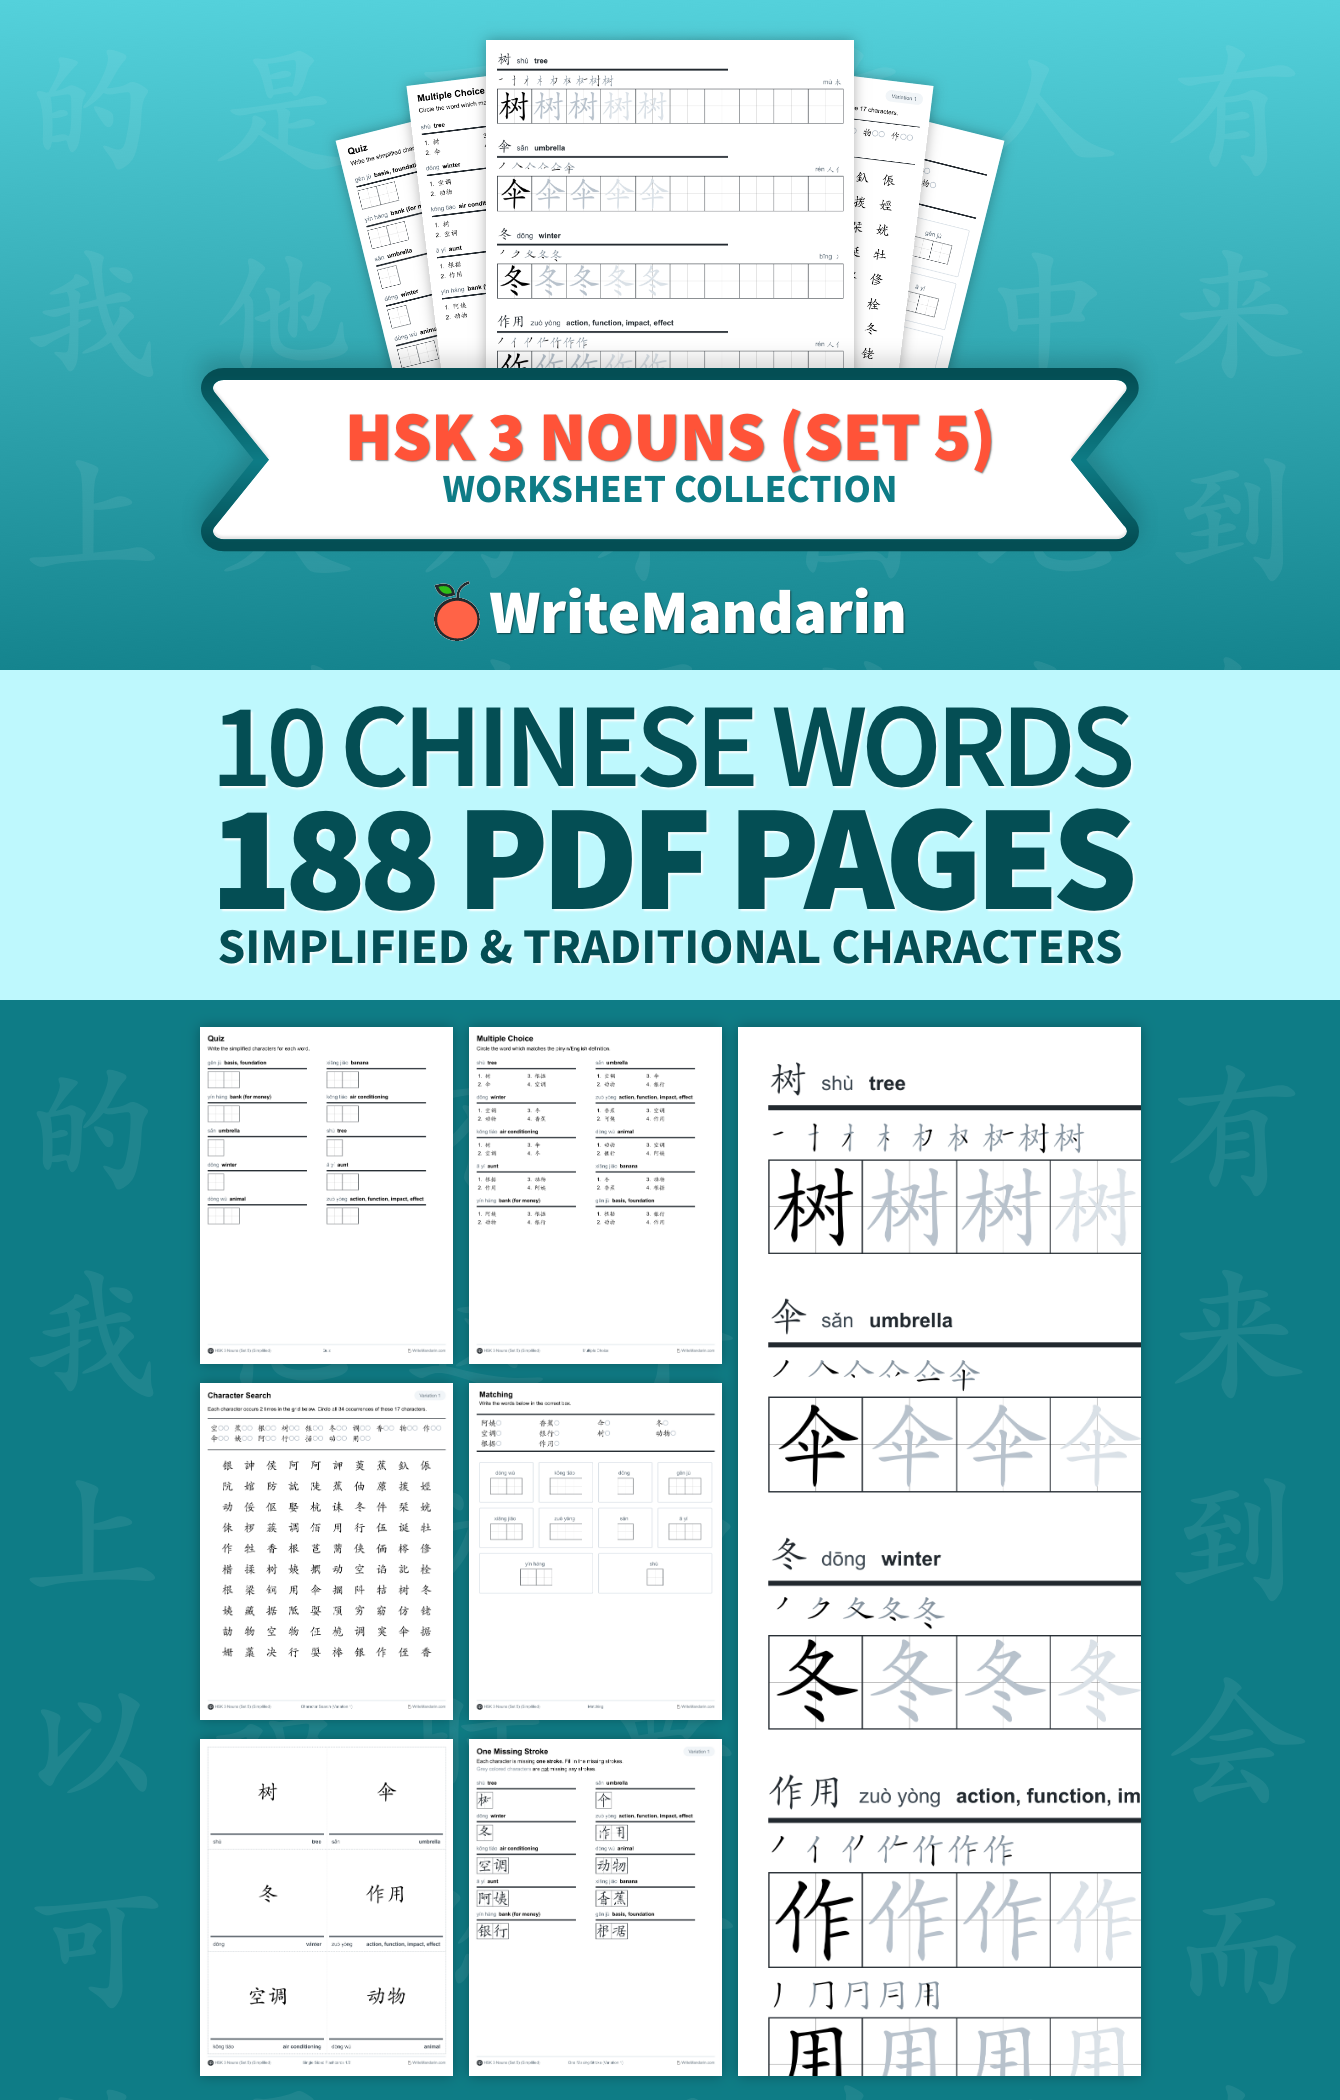 Preview image of HSK 3 Nouns (Set 5) worksheet collection